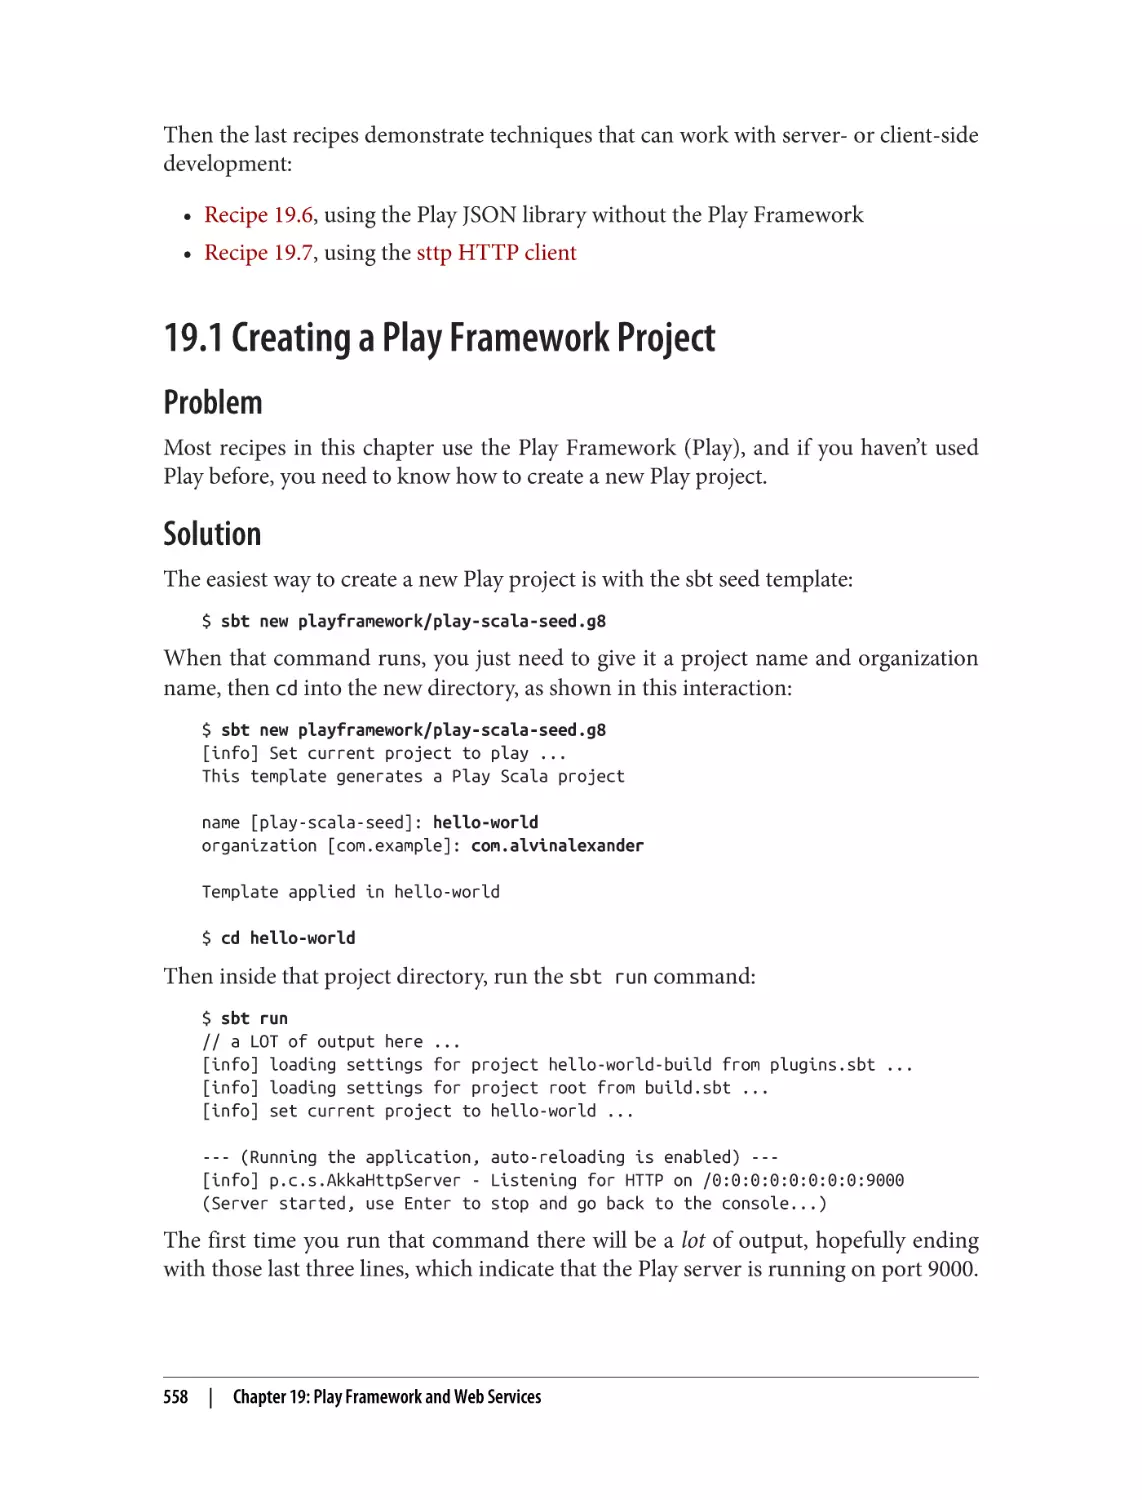 19.1 Creating a Play Framework Project
Problem
Solution